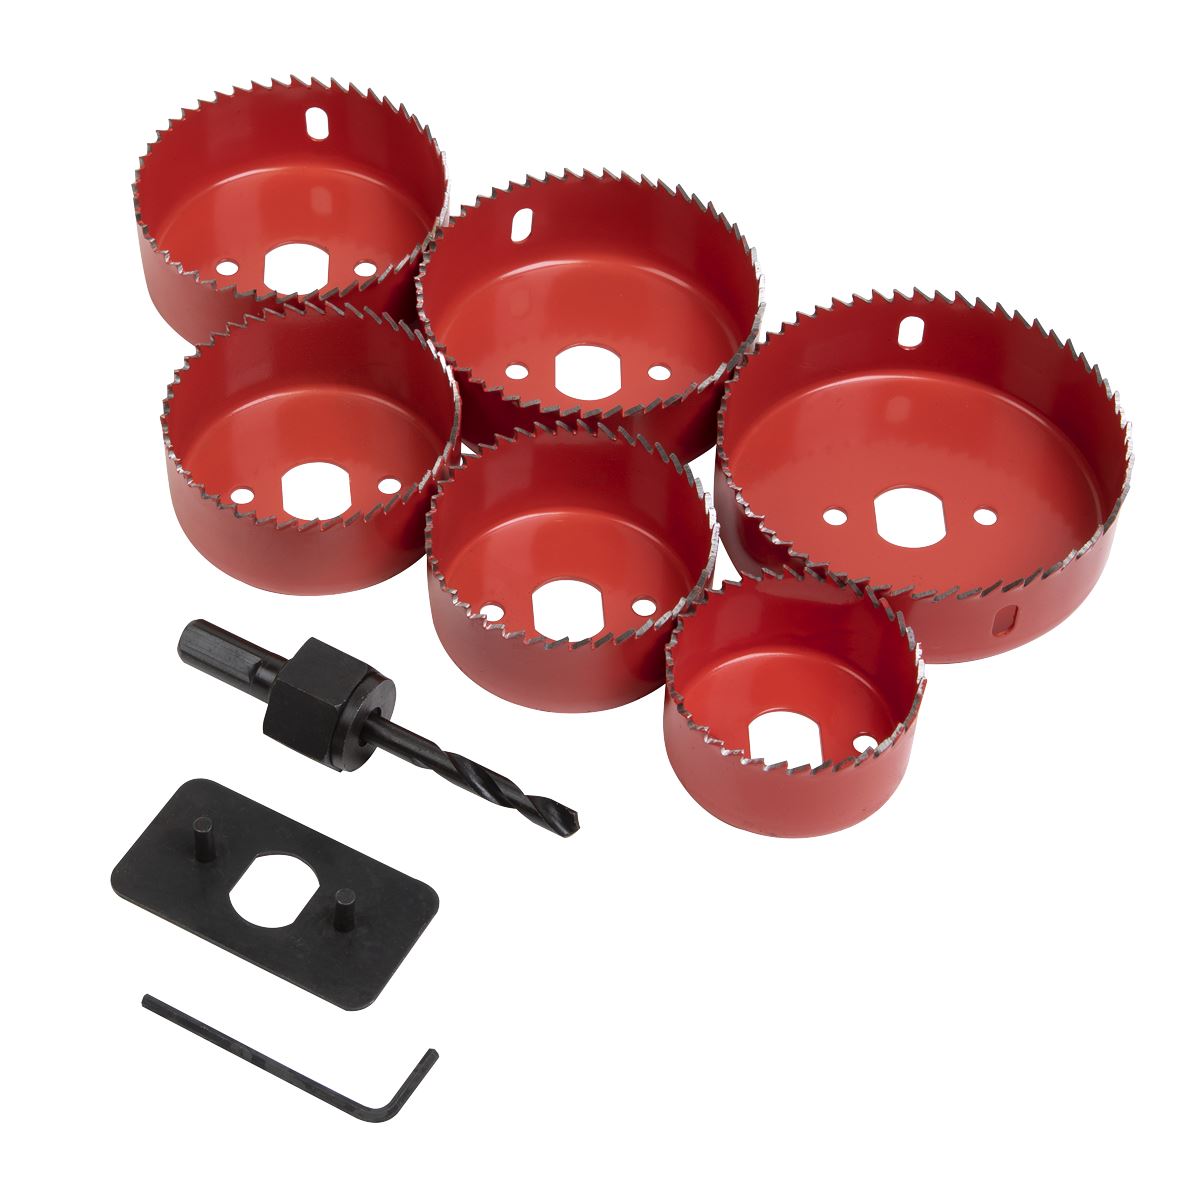 Worksafe by Sealey Downlight Hole Saw Kit 9pc